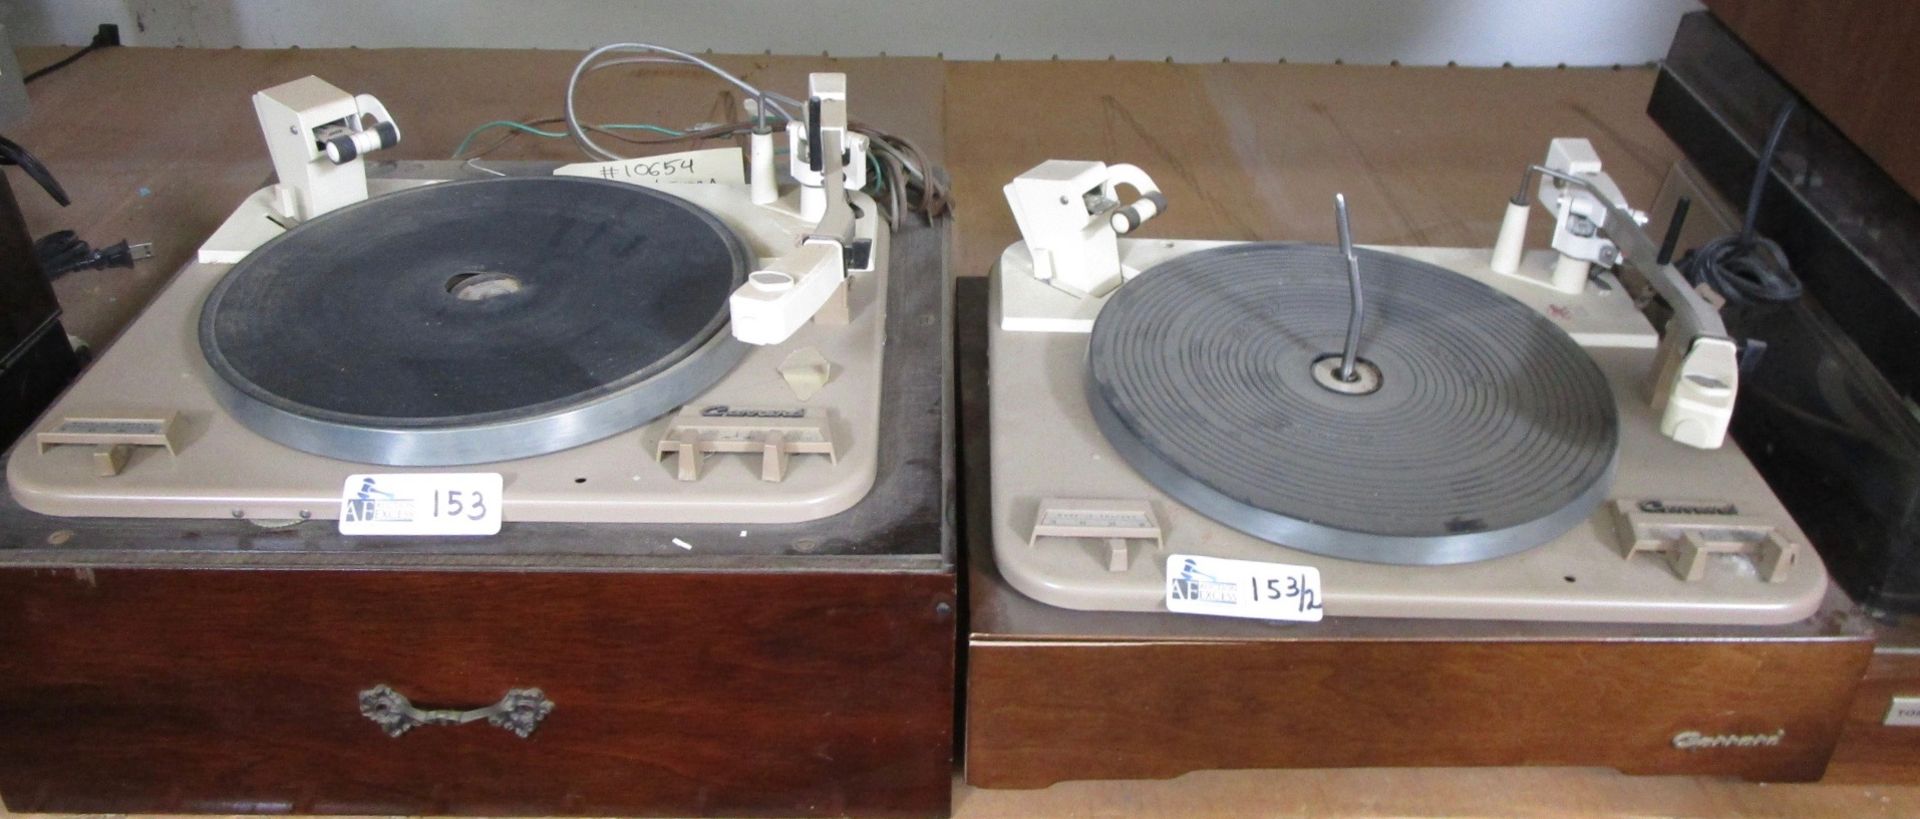 LOT OF 2 GARRARD TURNTABLES TYPE A 1962